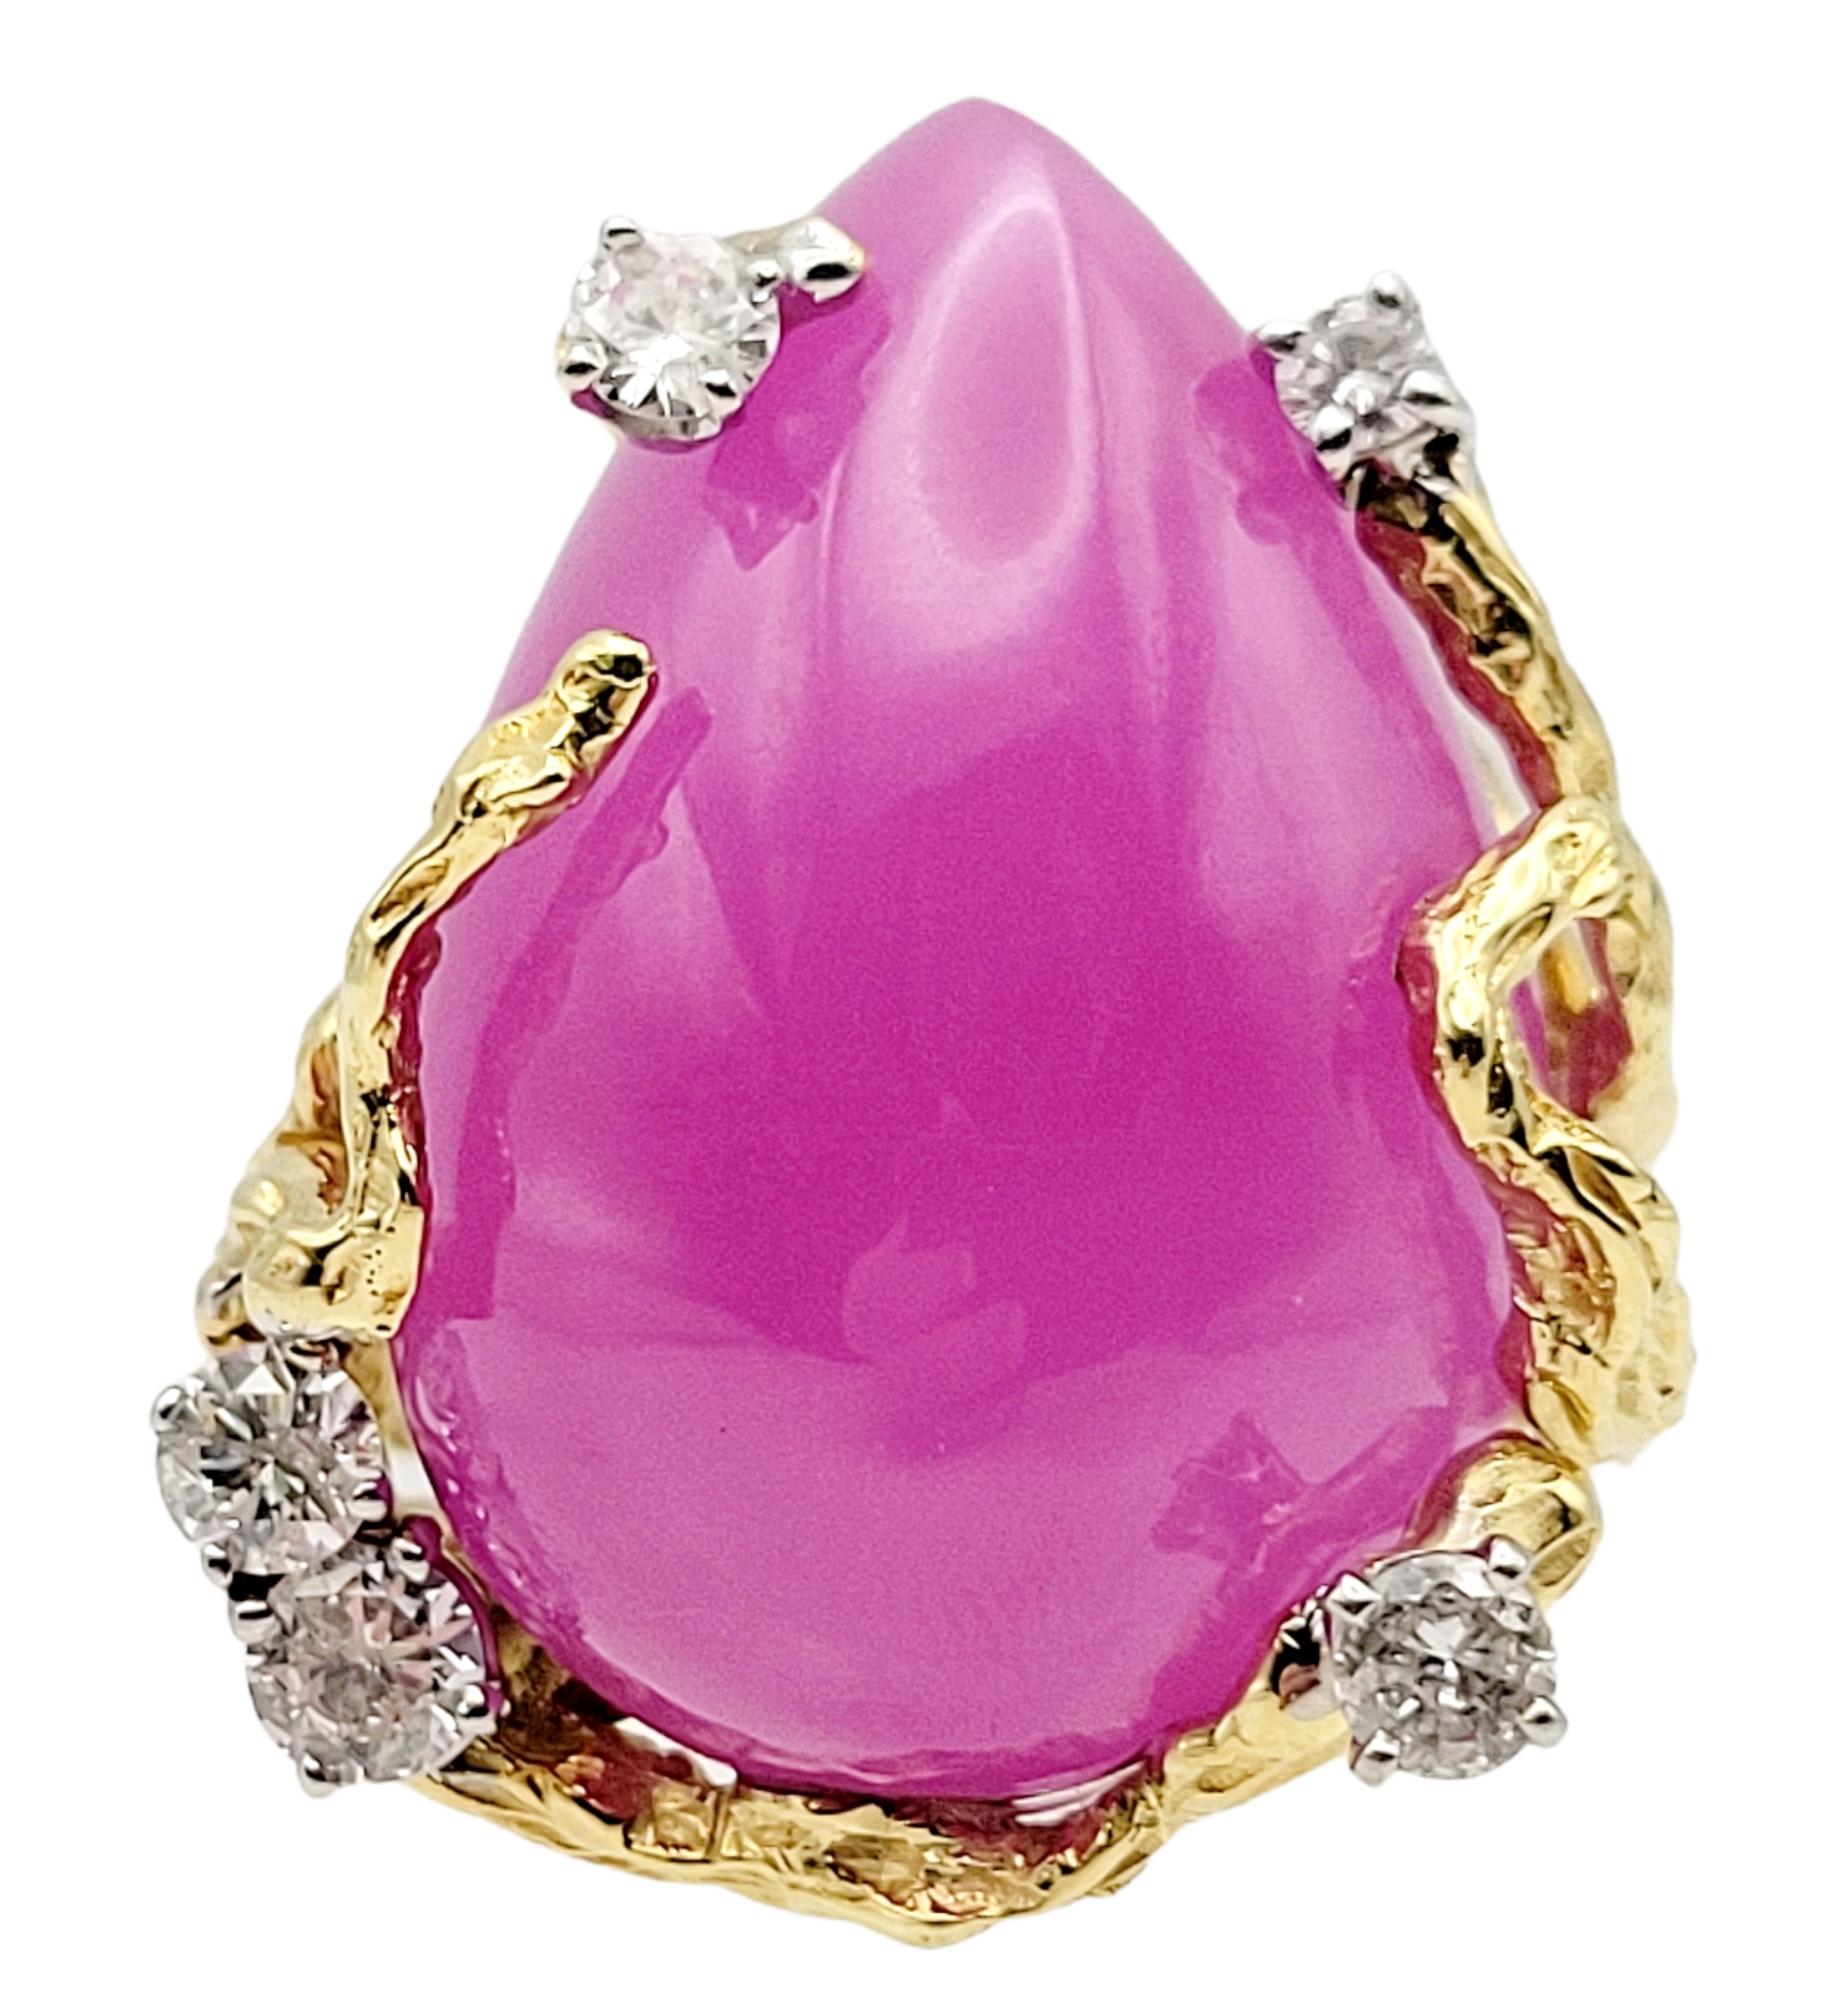 Ring size: 6.75

This massive, colorful cocktail ring has all the wow factor you've been looking for! Striking in both size and color, this remarkable piece will not go unnoticed. 

The stunning pear cabochon lab created pink sapphire stone is an